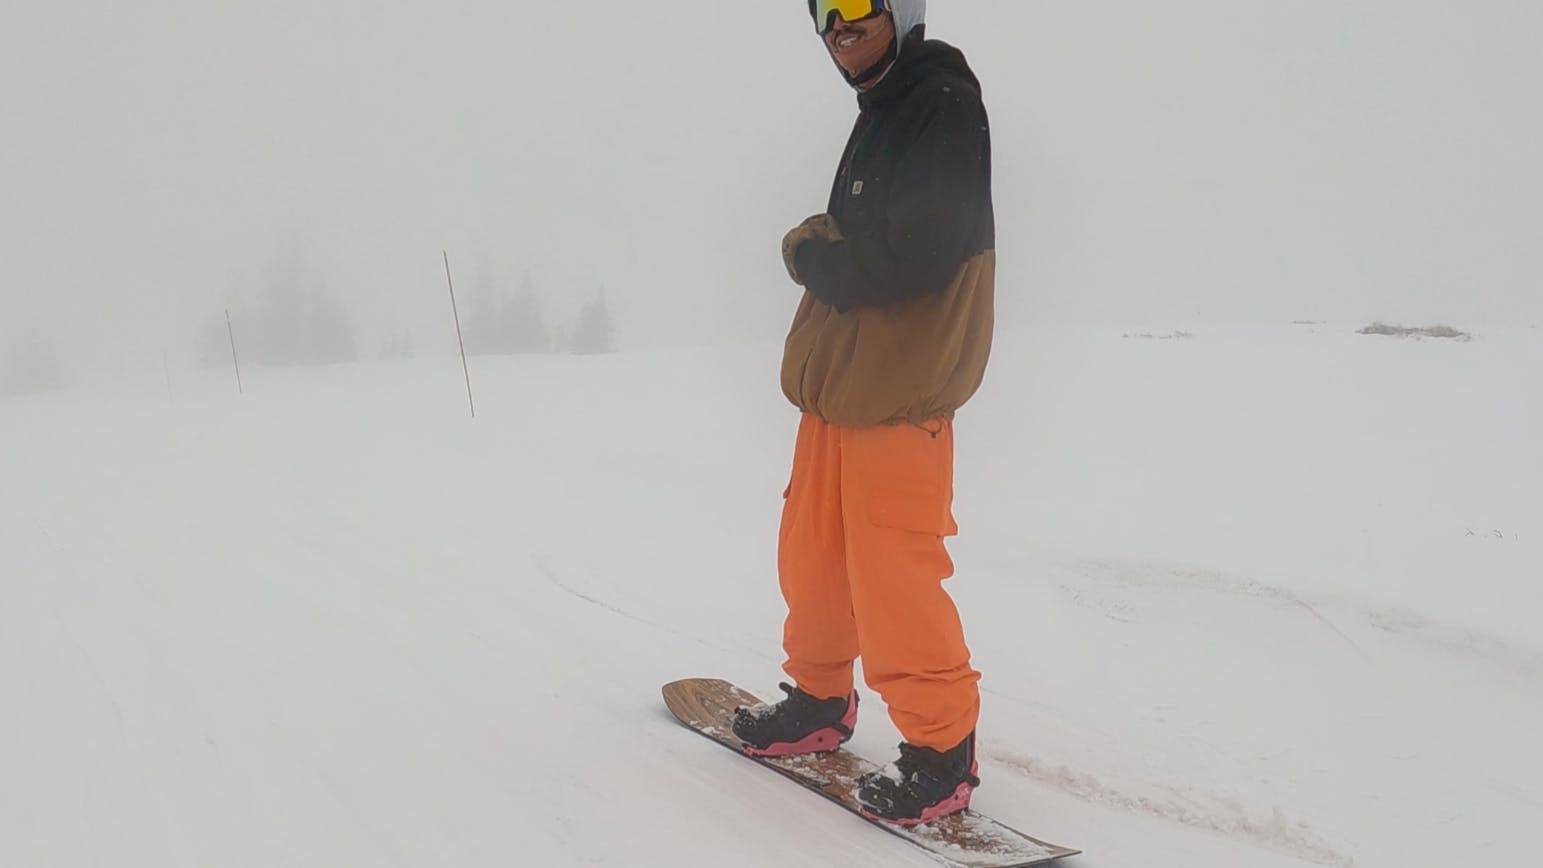 A snowboarder riding the 2023 Jones Flagship Snowboard.